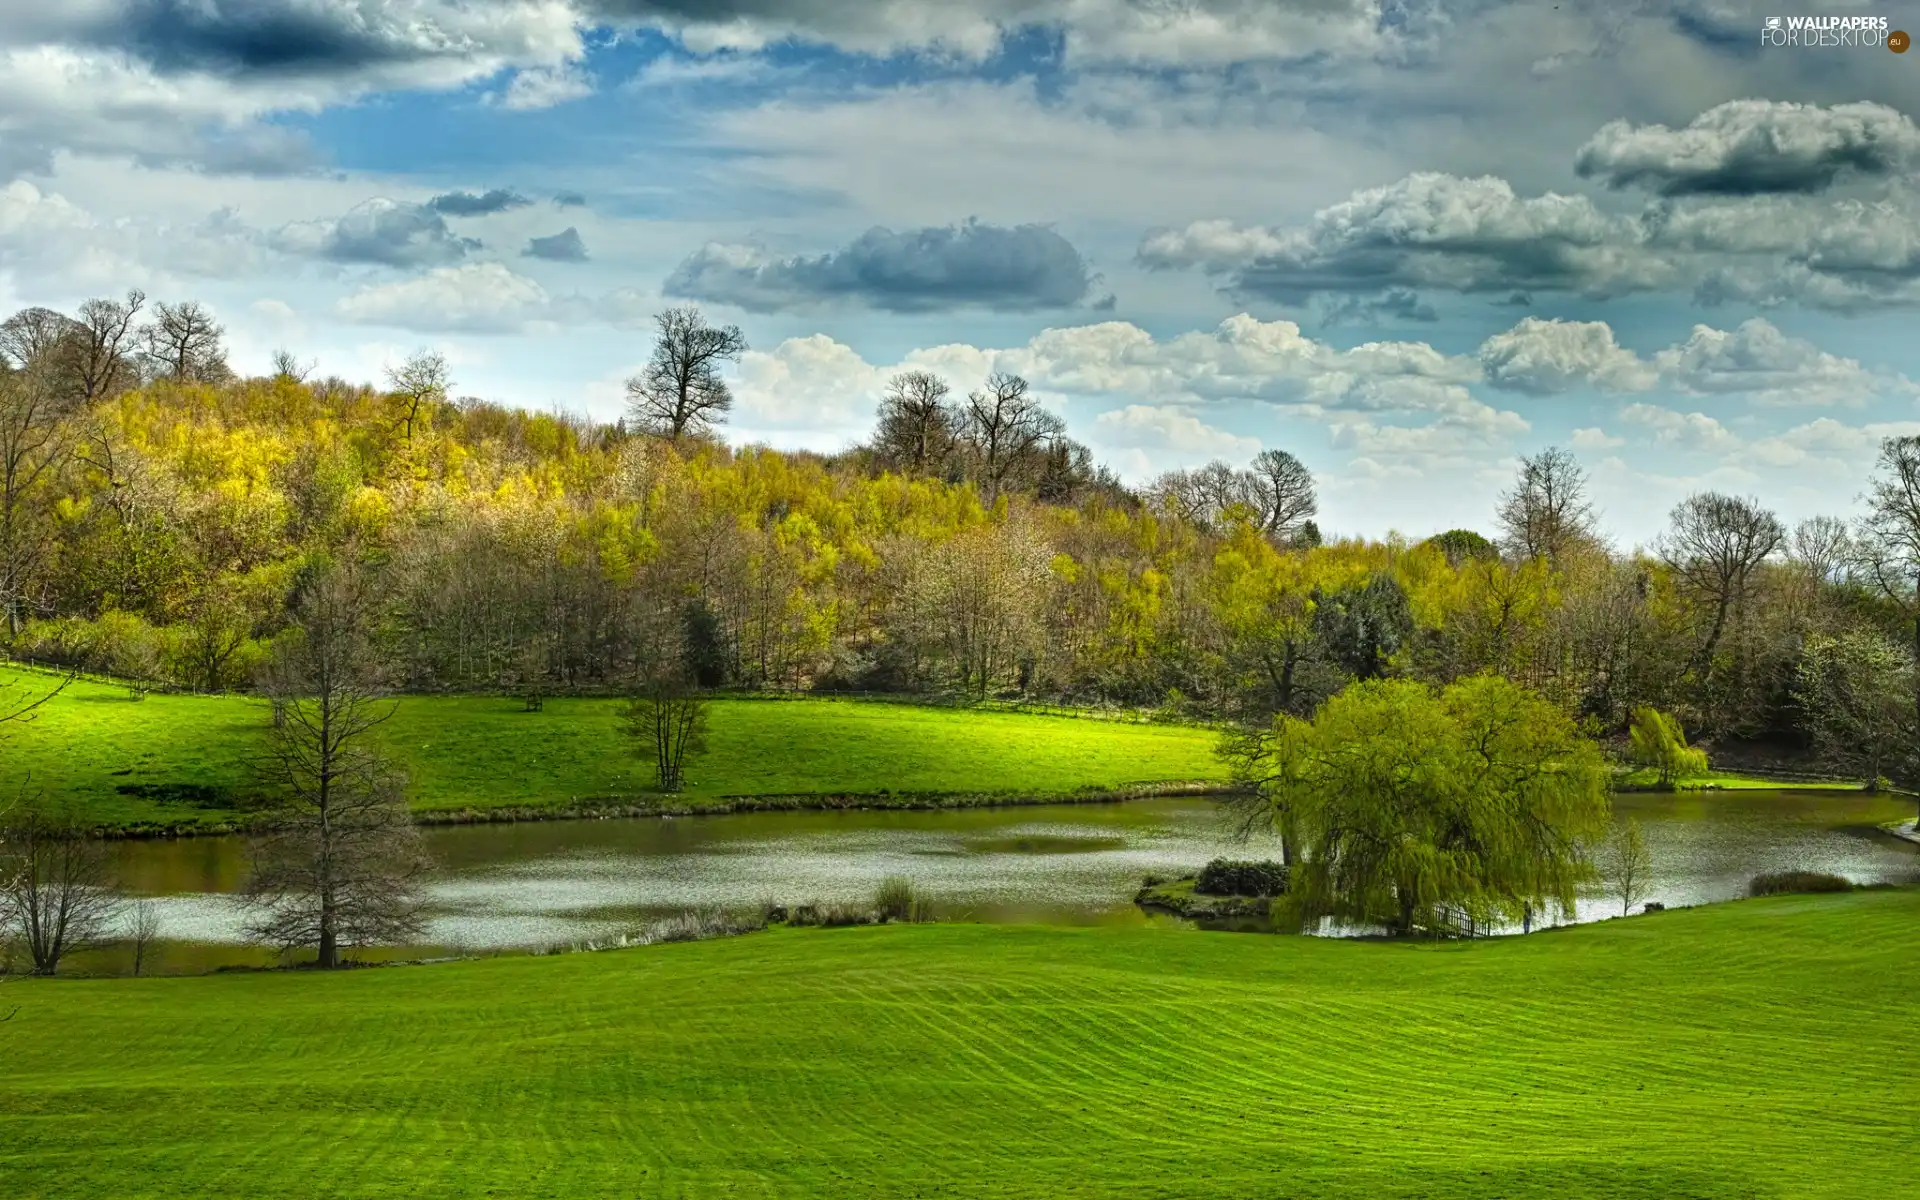 viewes, clouds, Meadow, trees, River